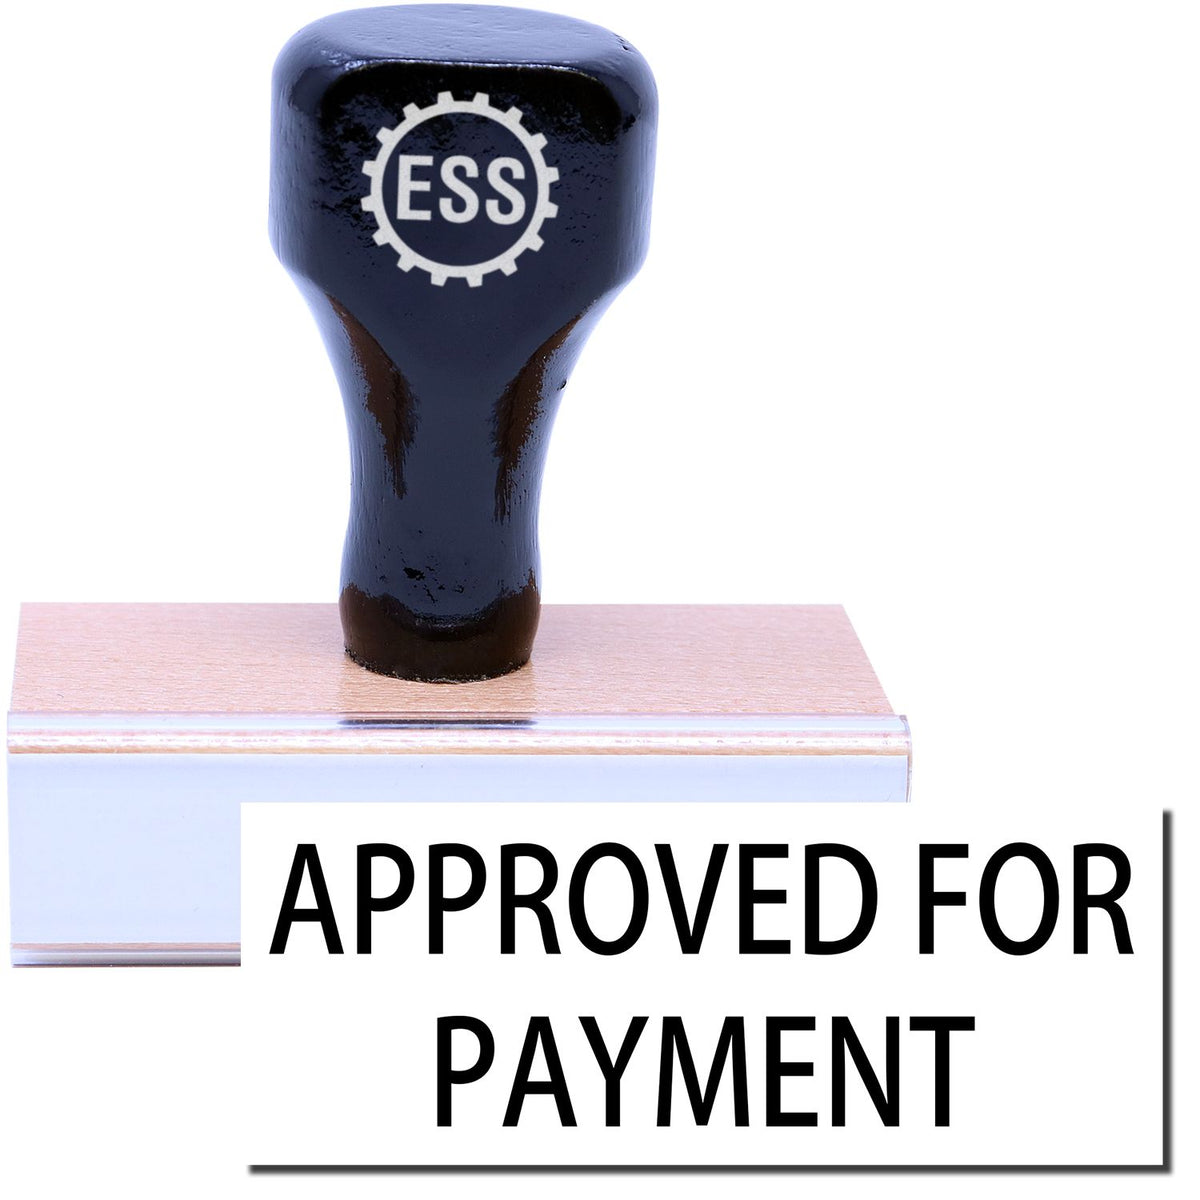 A stock office rubber stamp with a stamped image showing how the text &quot;APPROVED FOR PAYMENT&quot; in a large font is displayed after stamping.